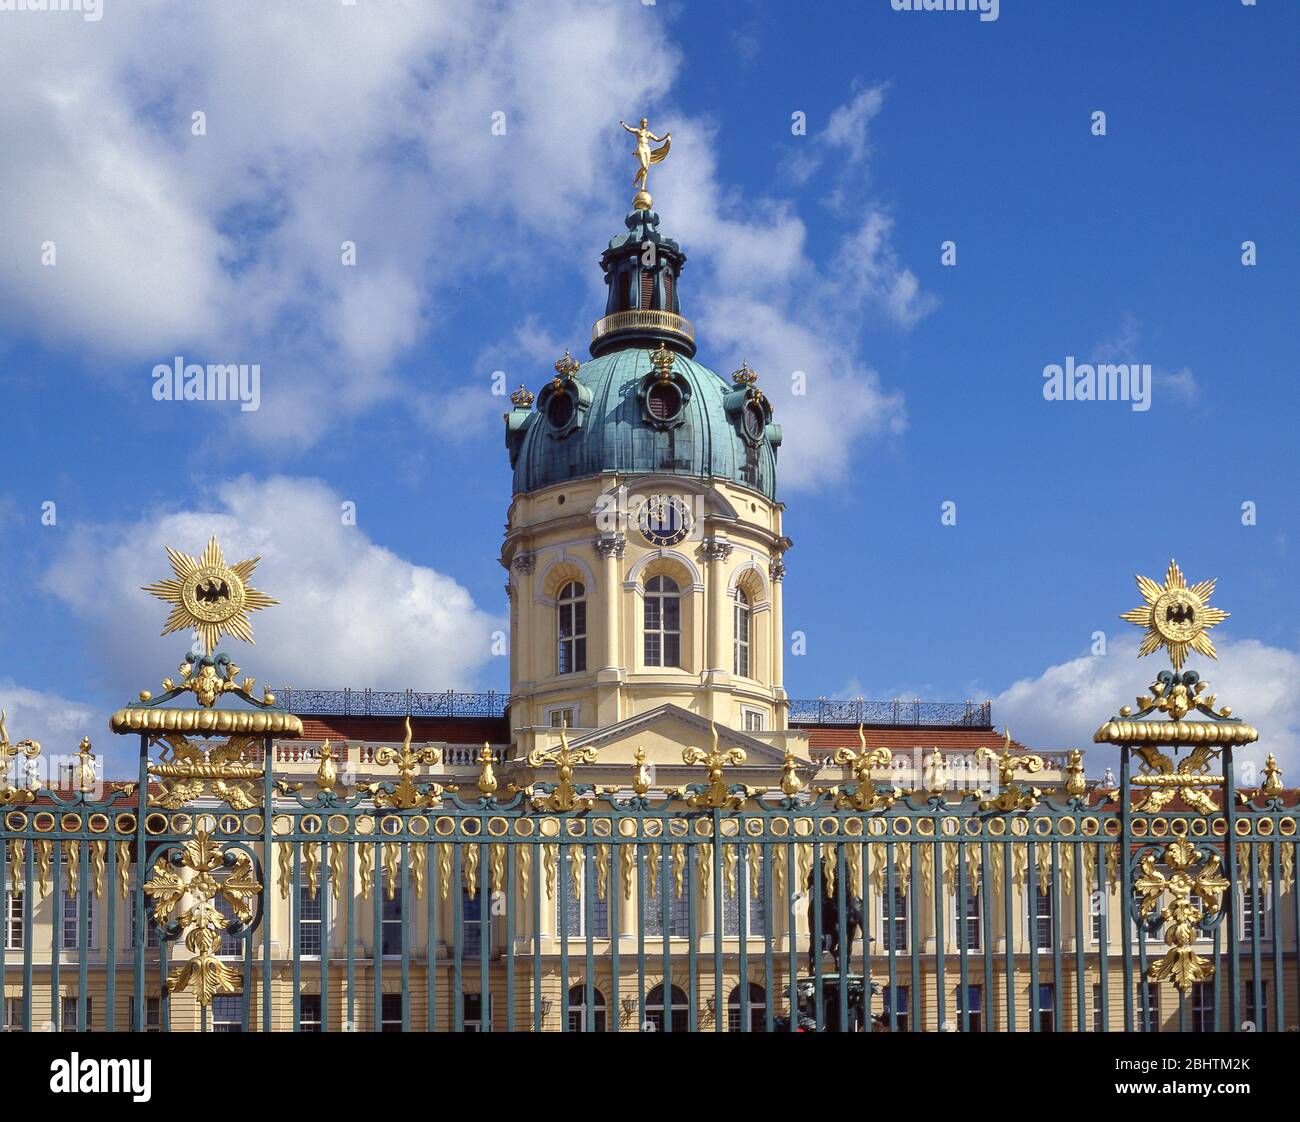 Front facade and gate of 17th century Charlottenburg Palace (Schloss Charlottenburg), Charlottenburg, Berlin, Federal Republic of Germany Stock Photo